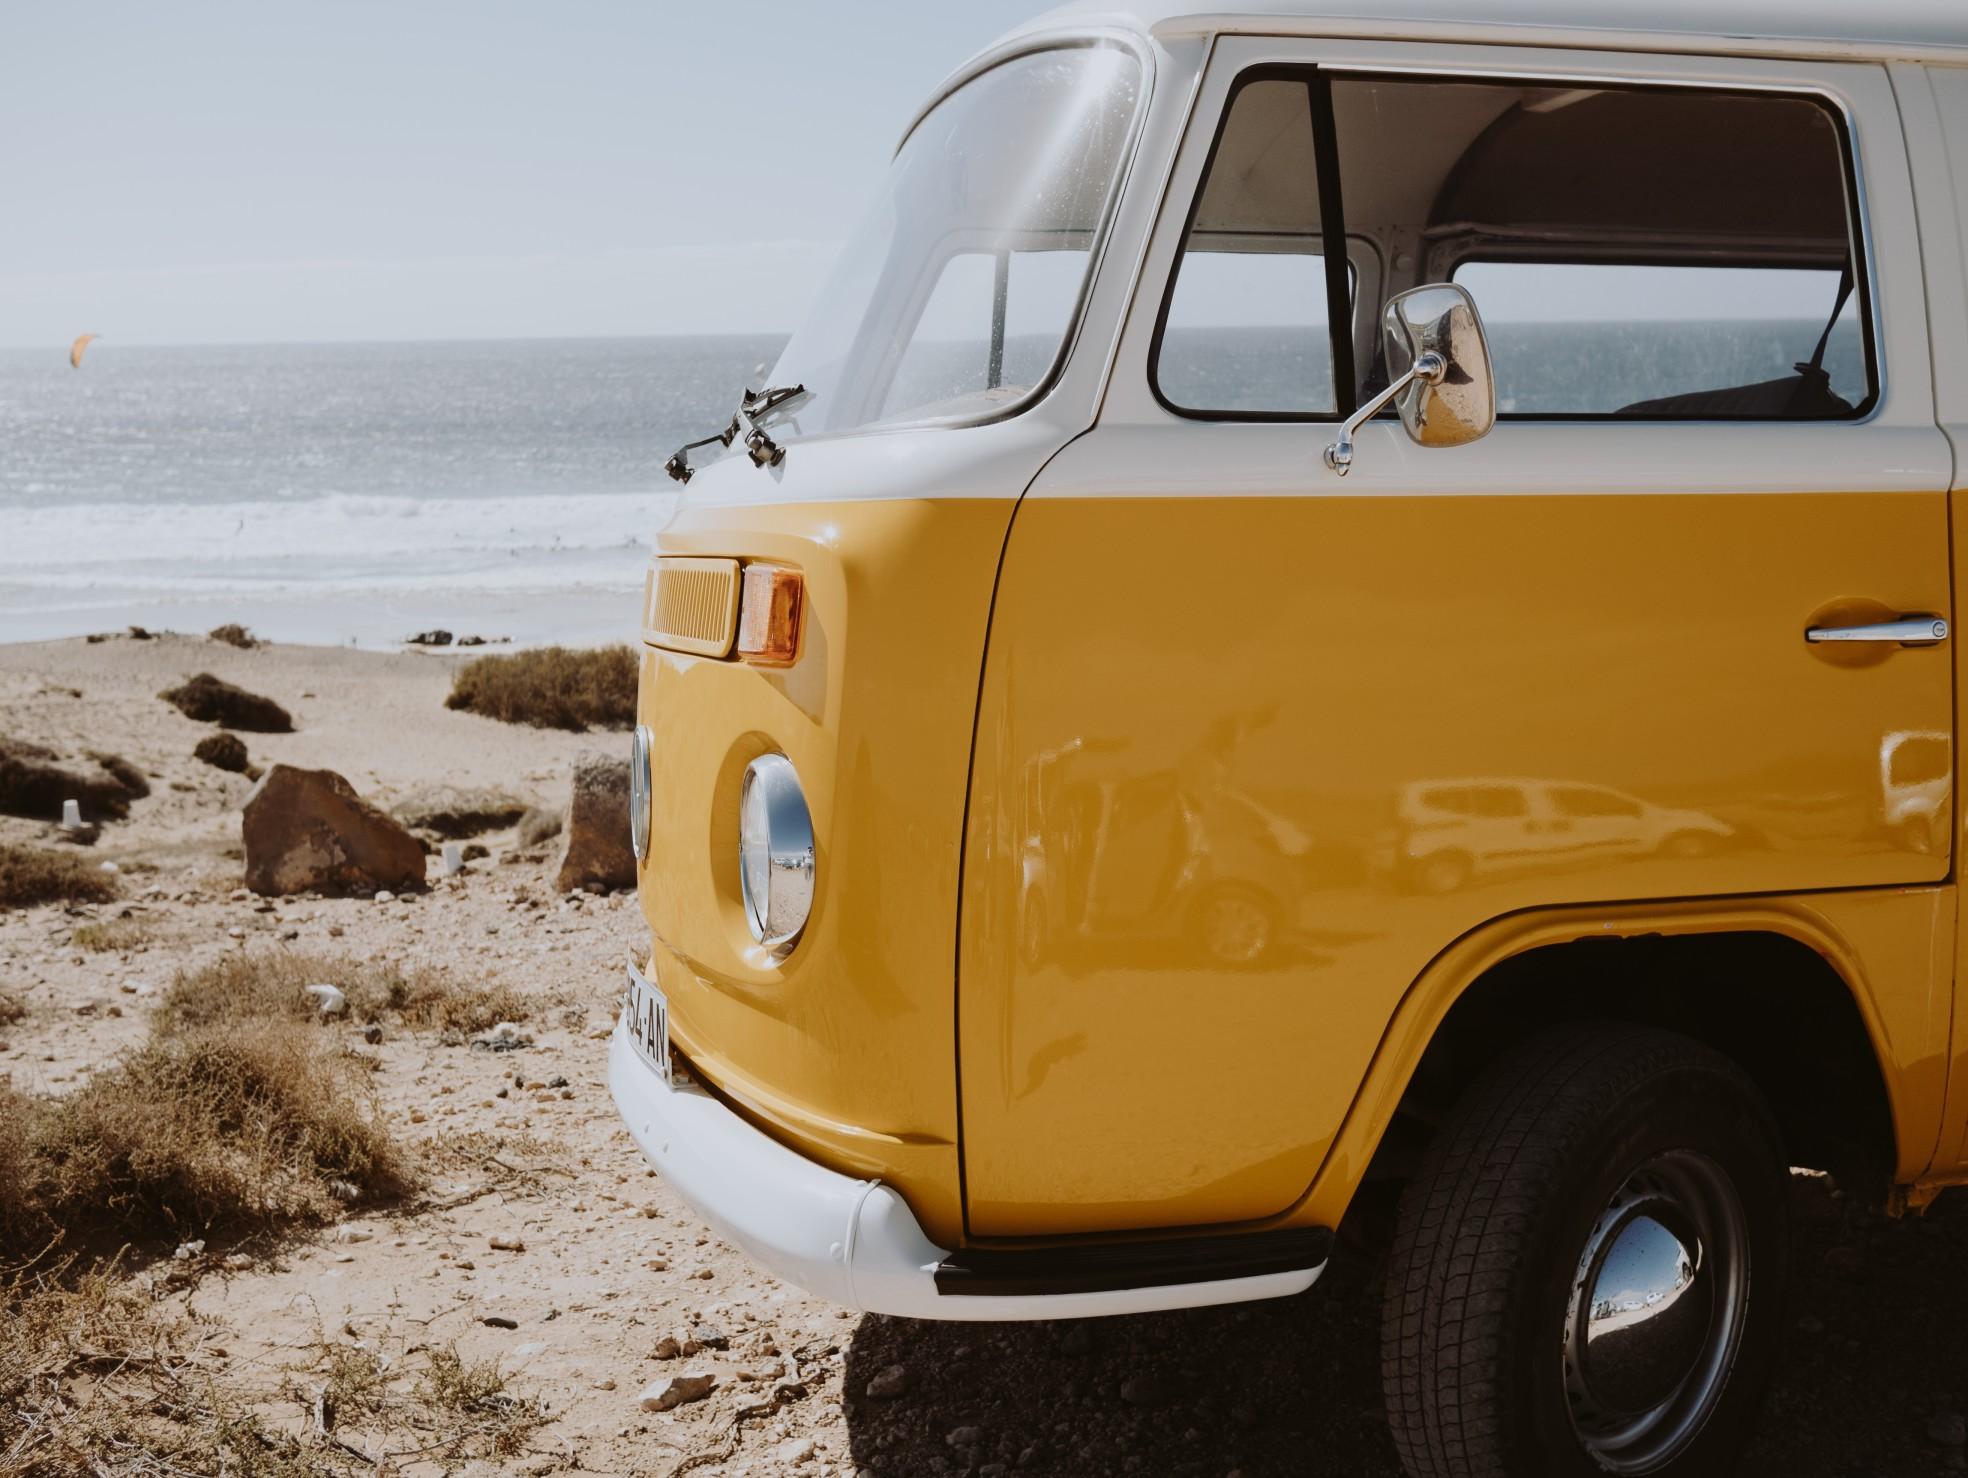 Let the good times roll with the fresh air and scenic views on a camper van road trip.